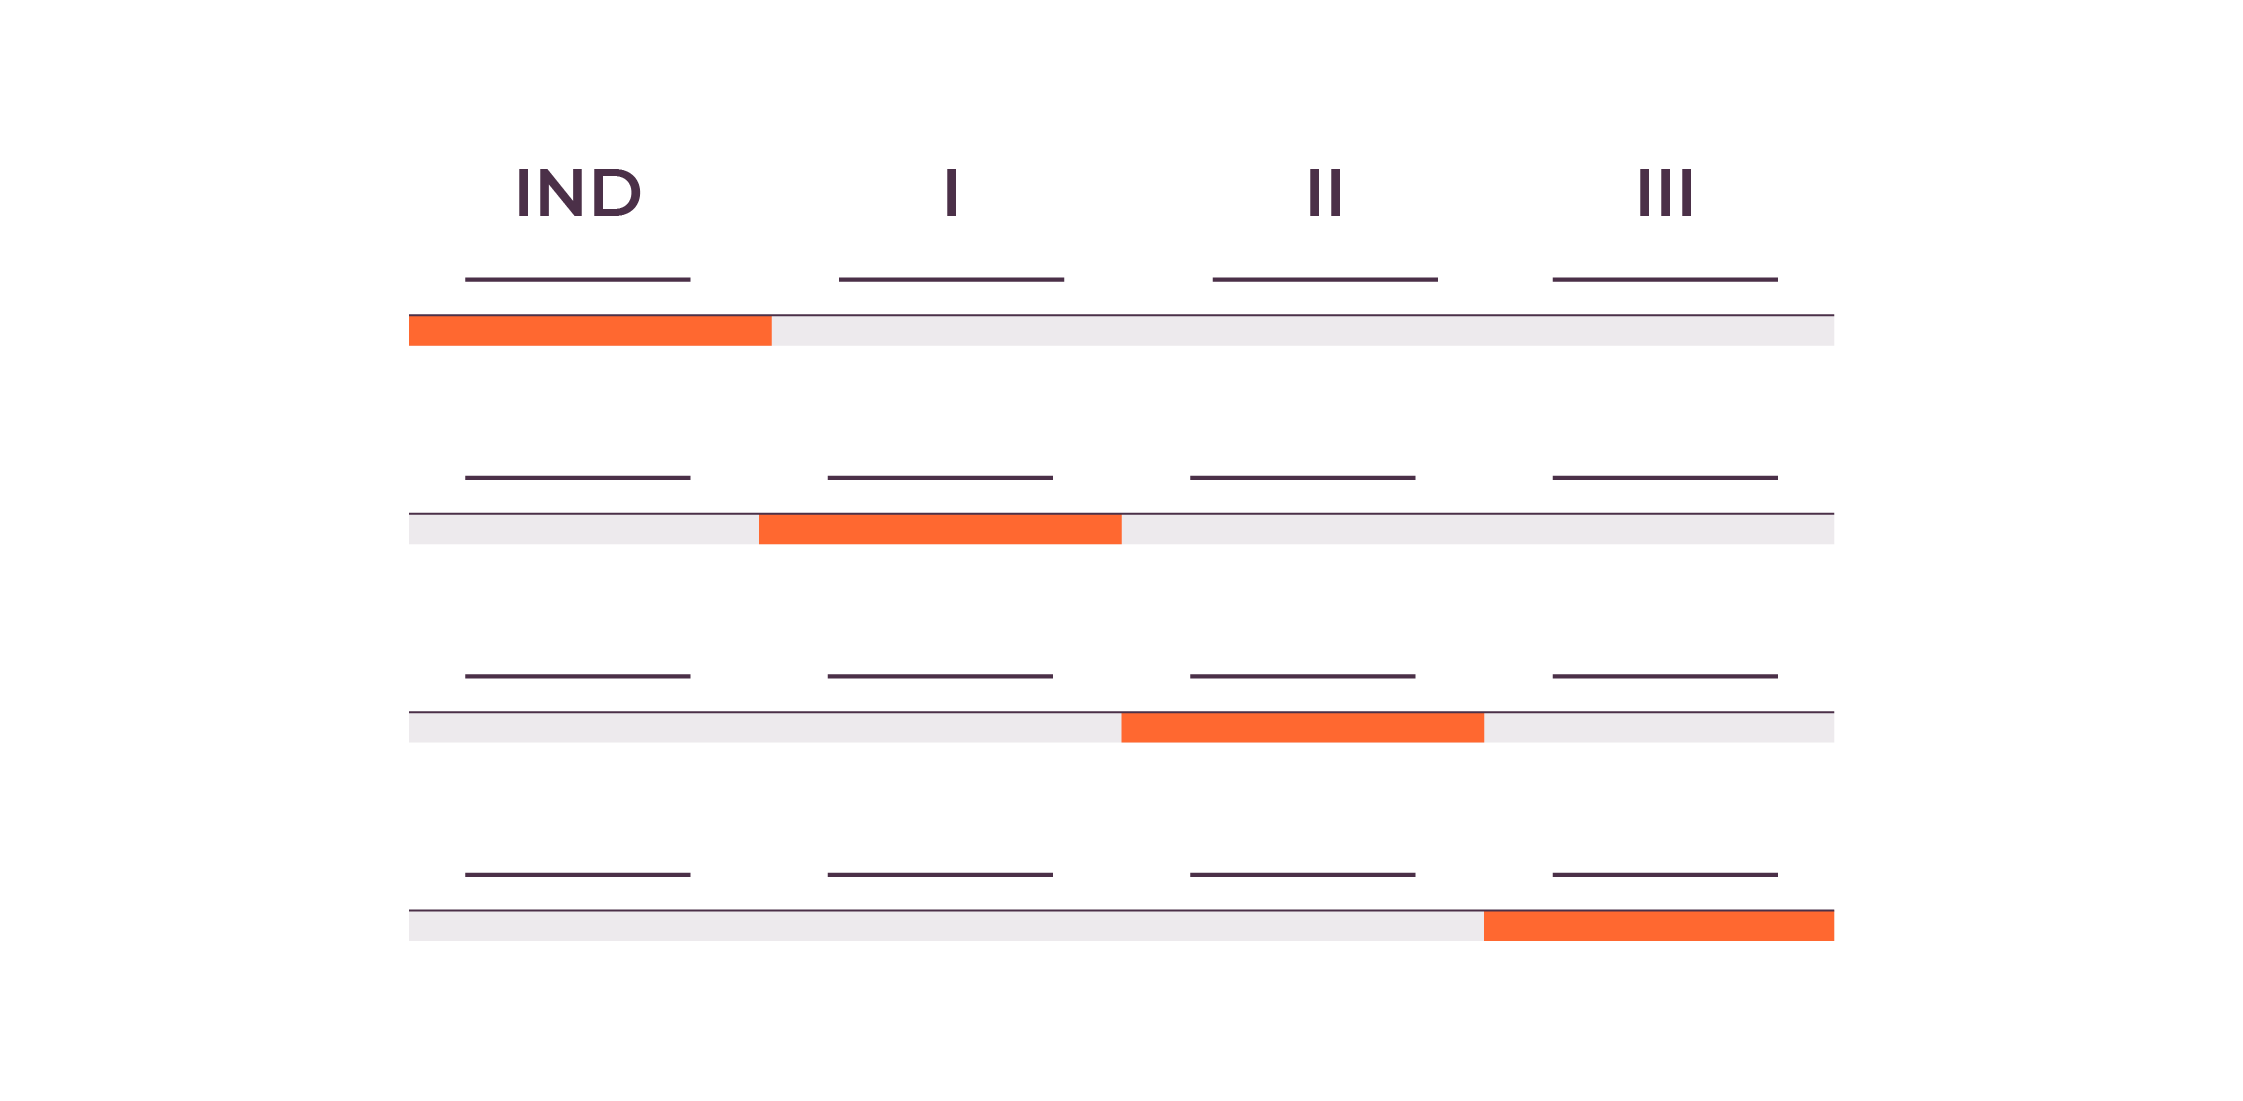 Schematic representation of a clinical pipeline